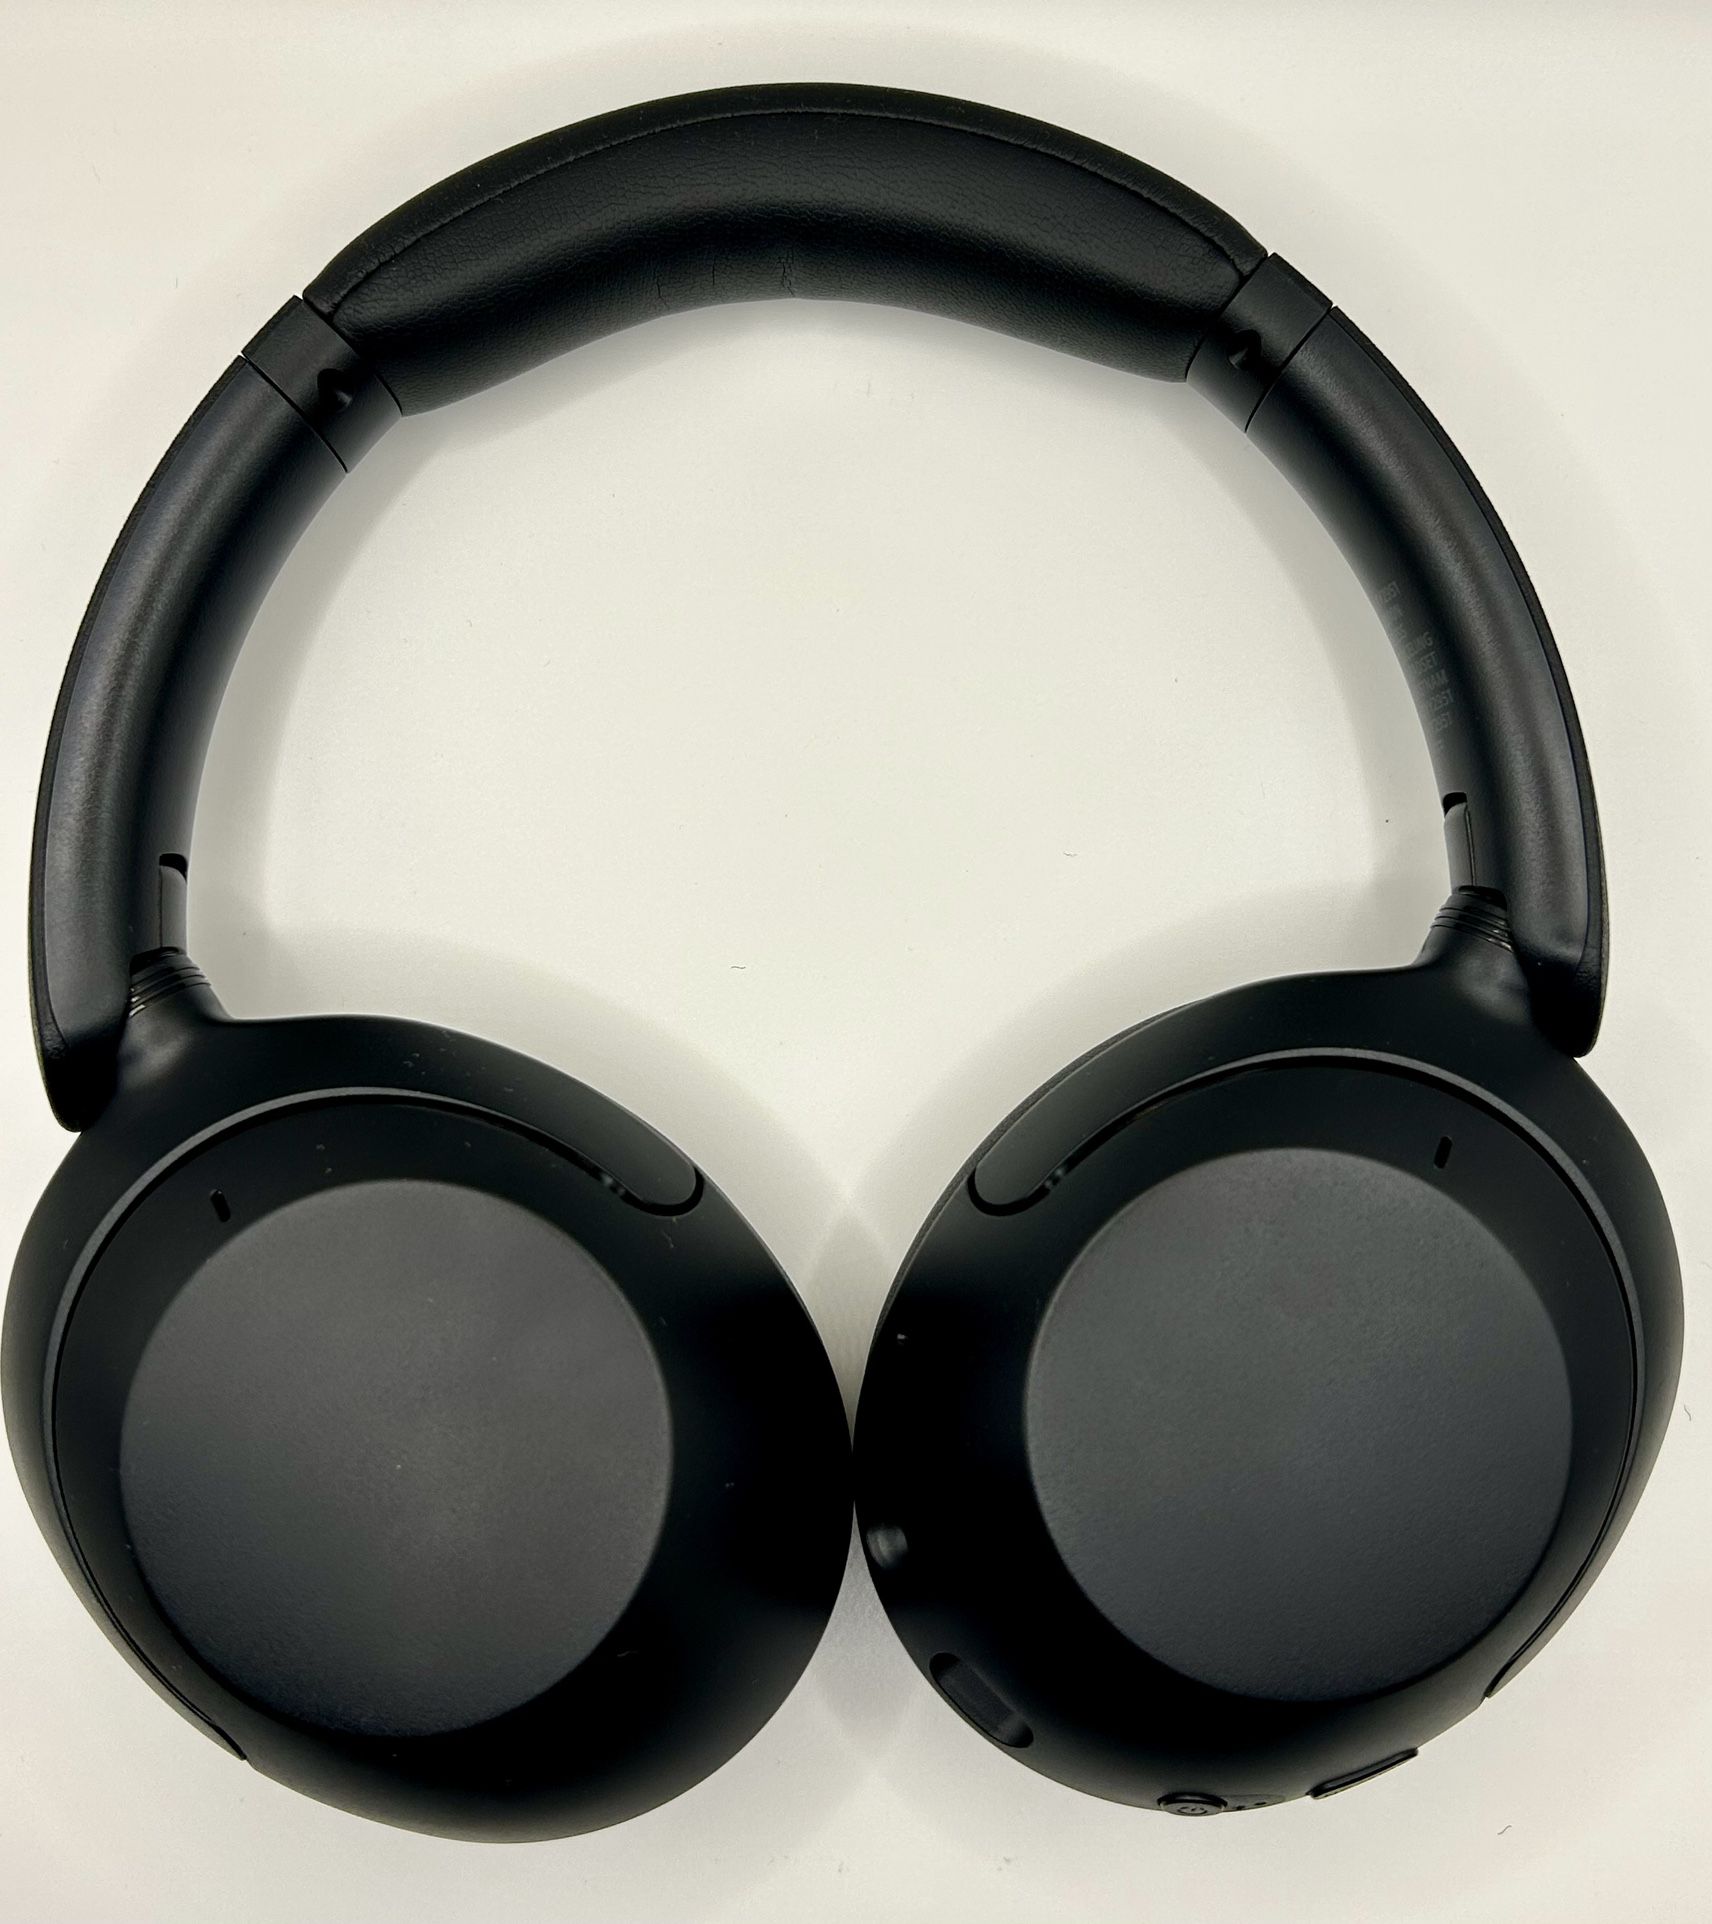 Sony WH-XB910N Wireless Noise Cancelling Over the Ear Headphones